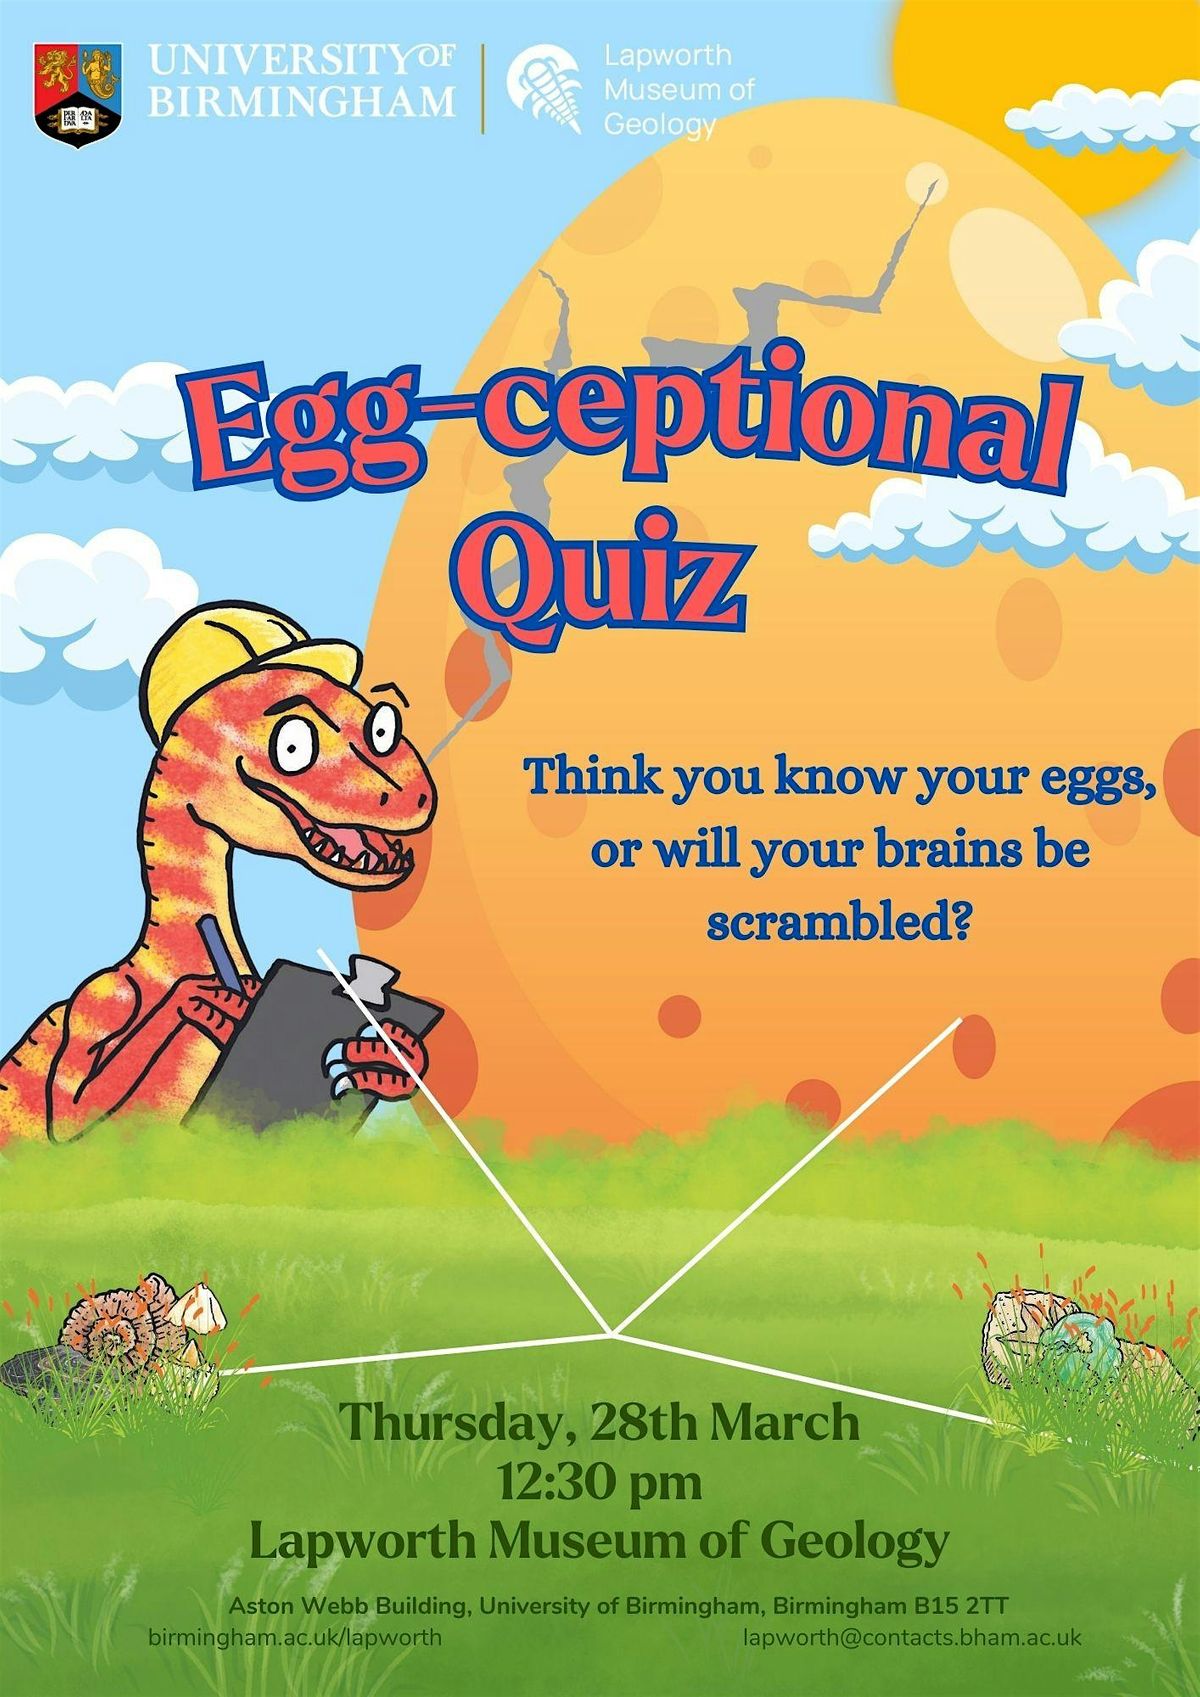 The Lapworth Egg-ceptional Easter Quiz